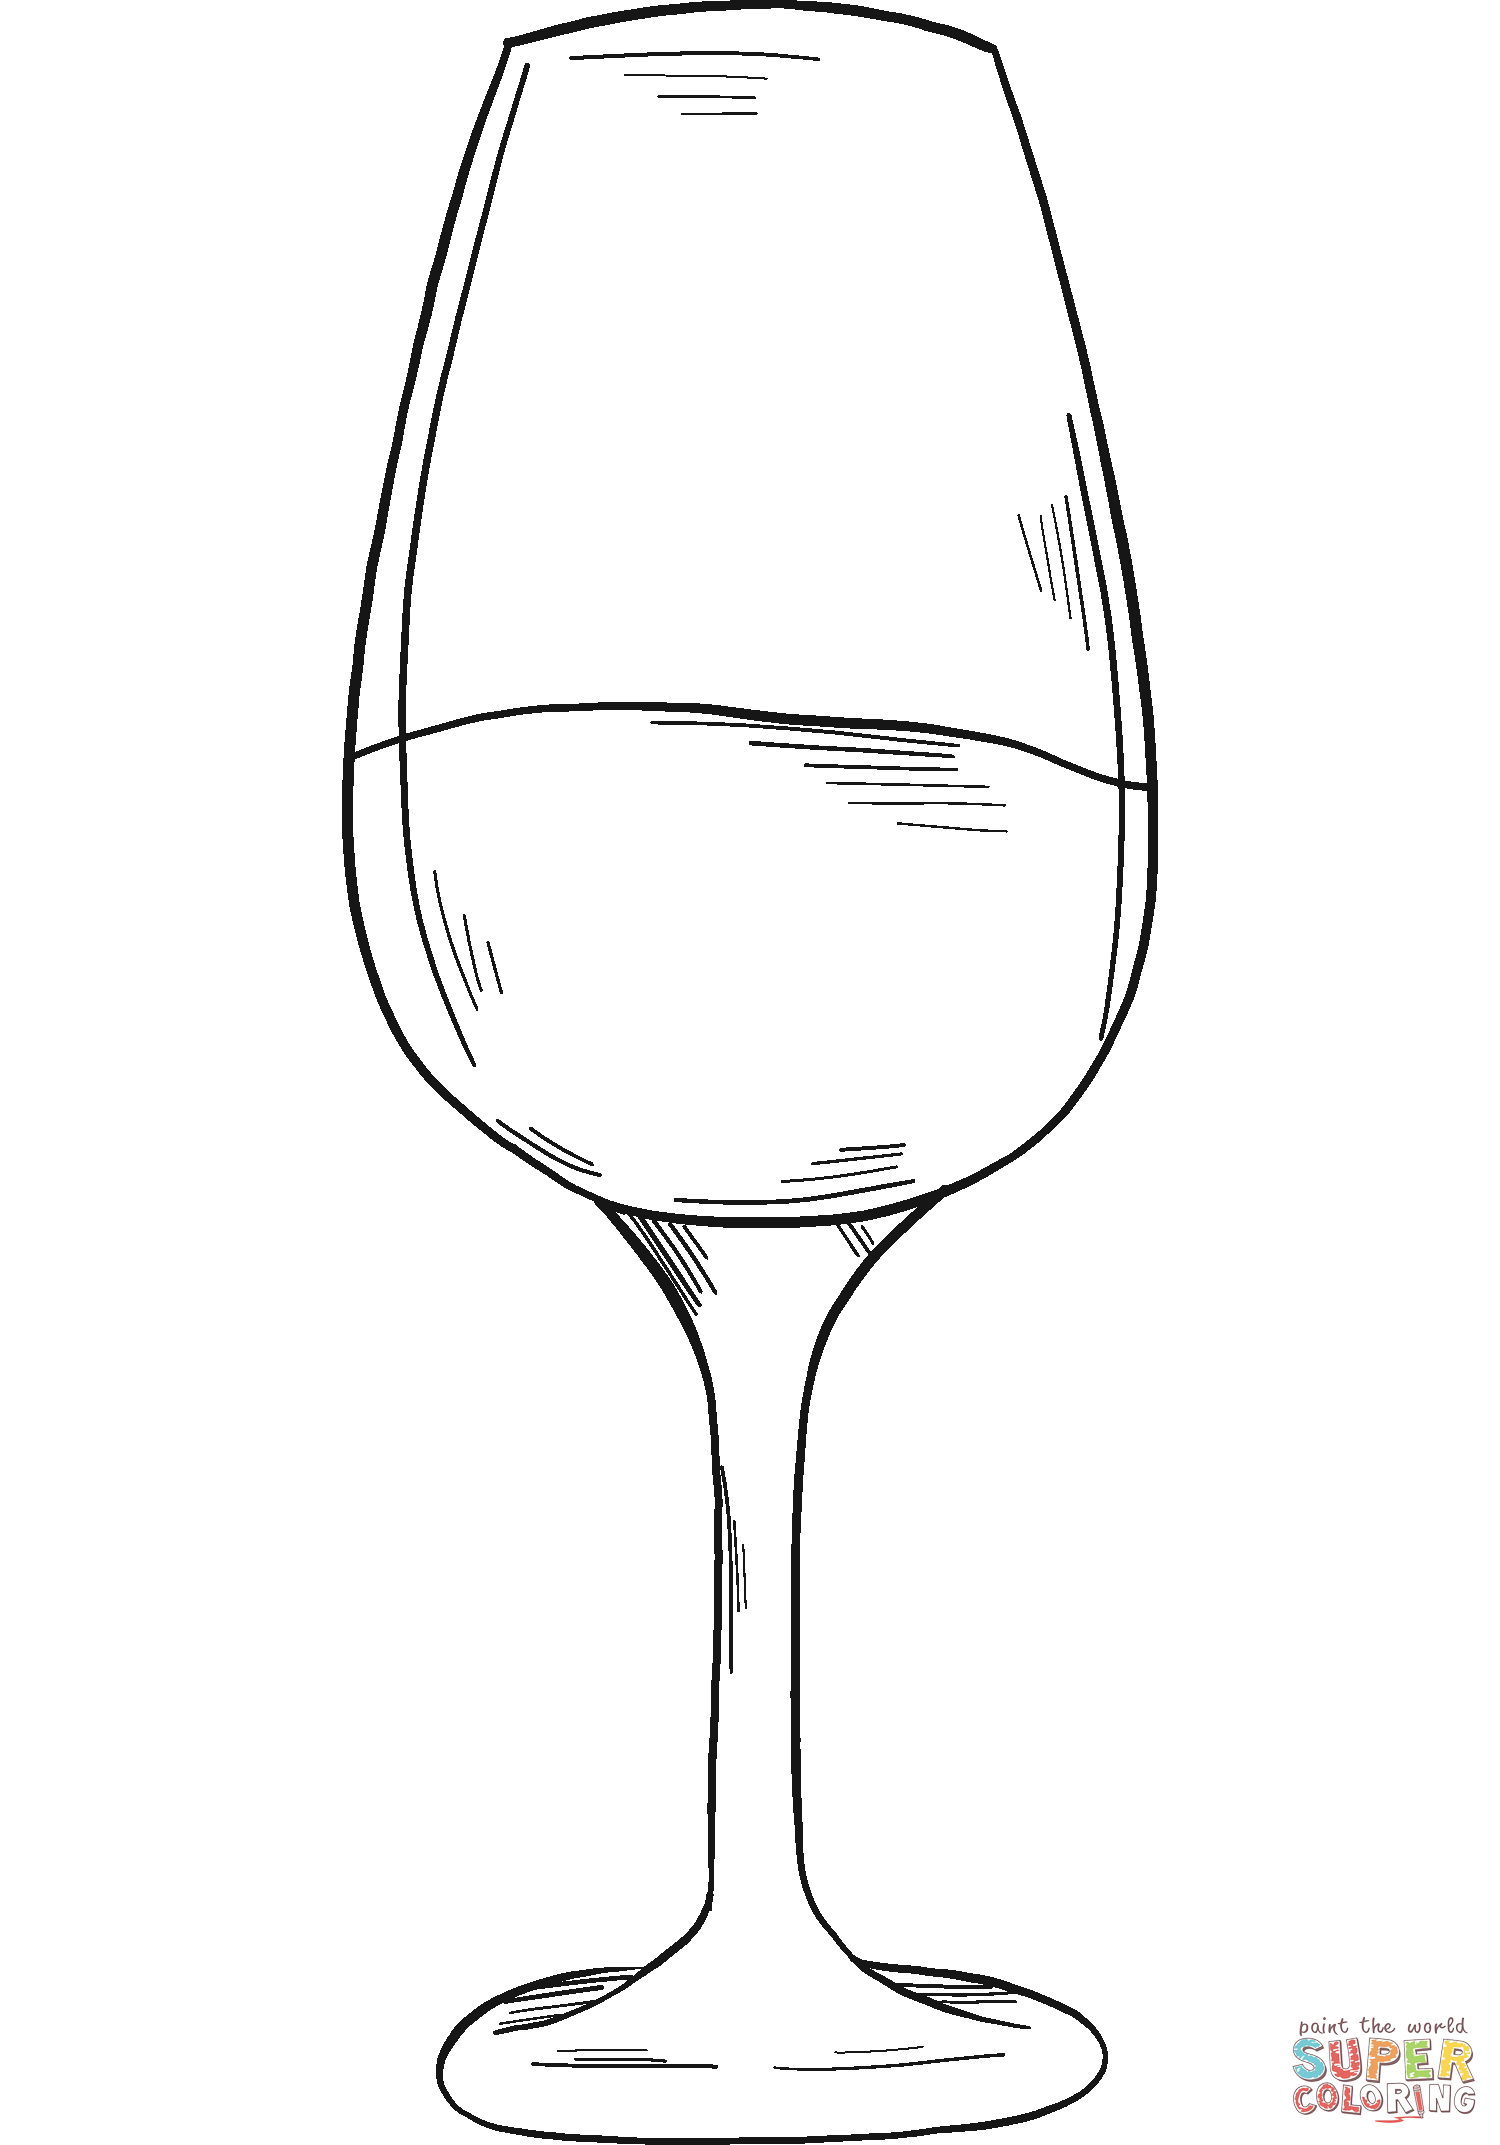 Glass of wine coloring page free printable coloring pages